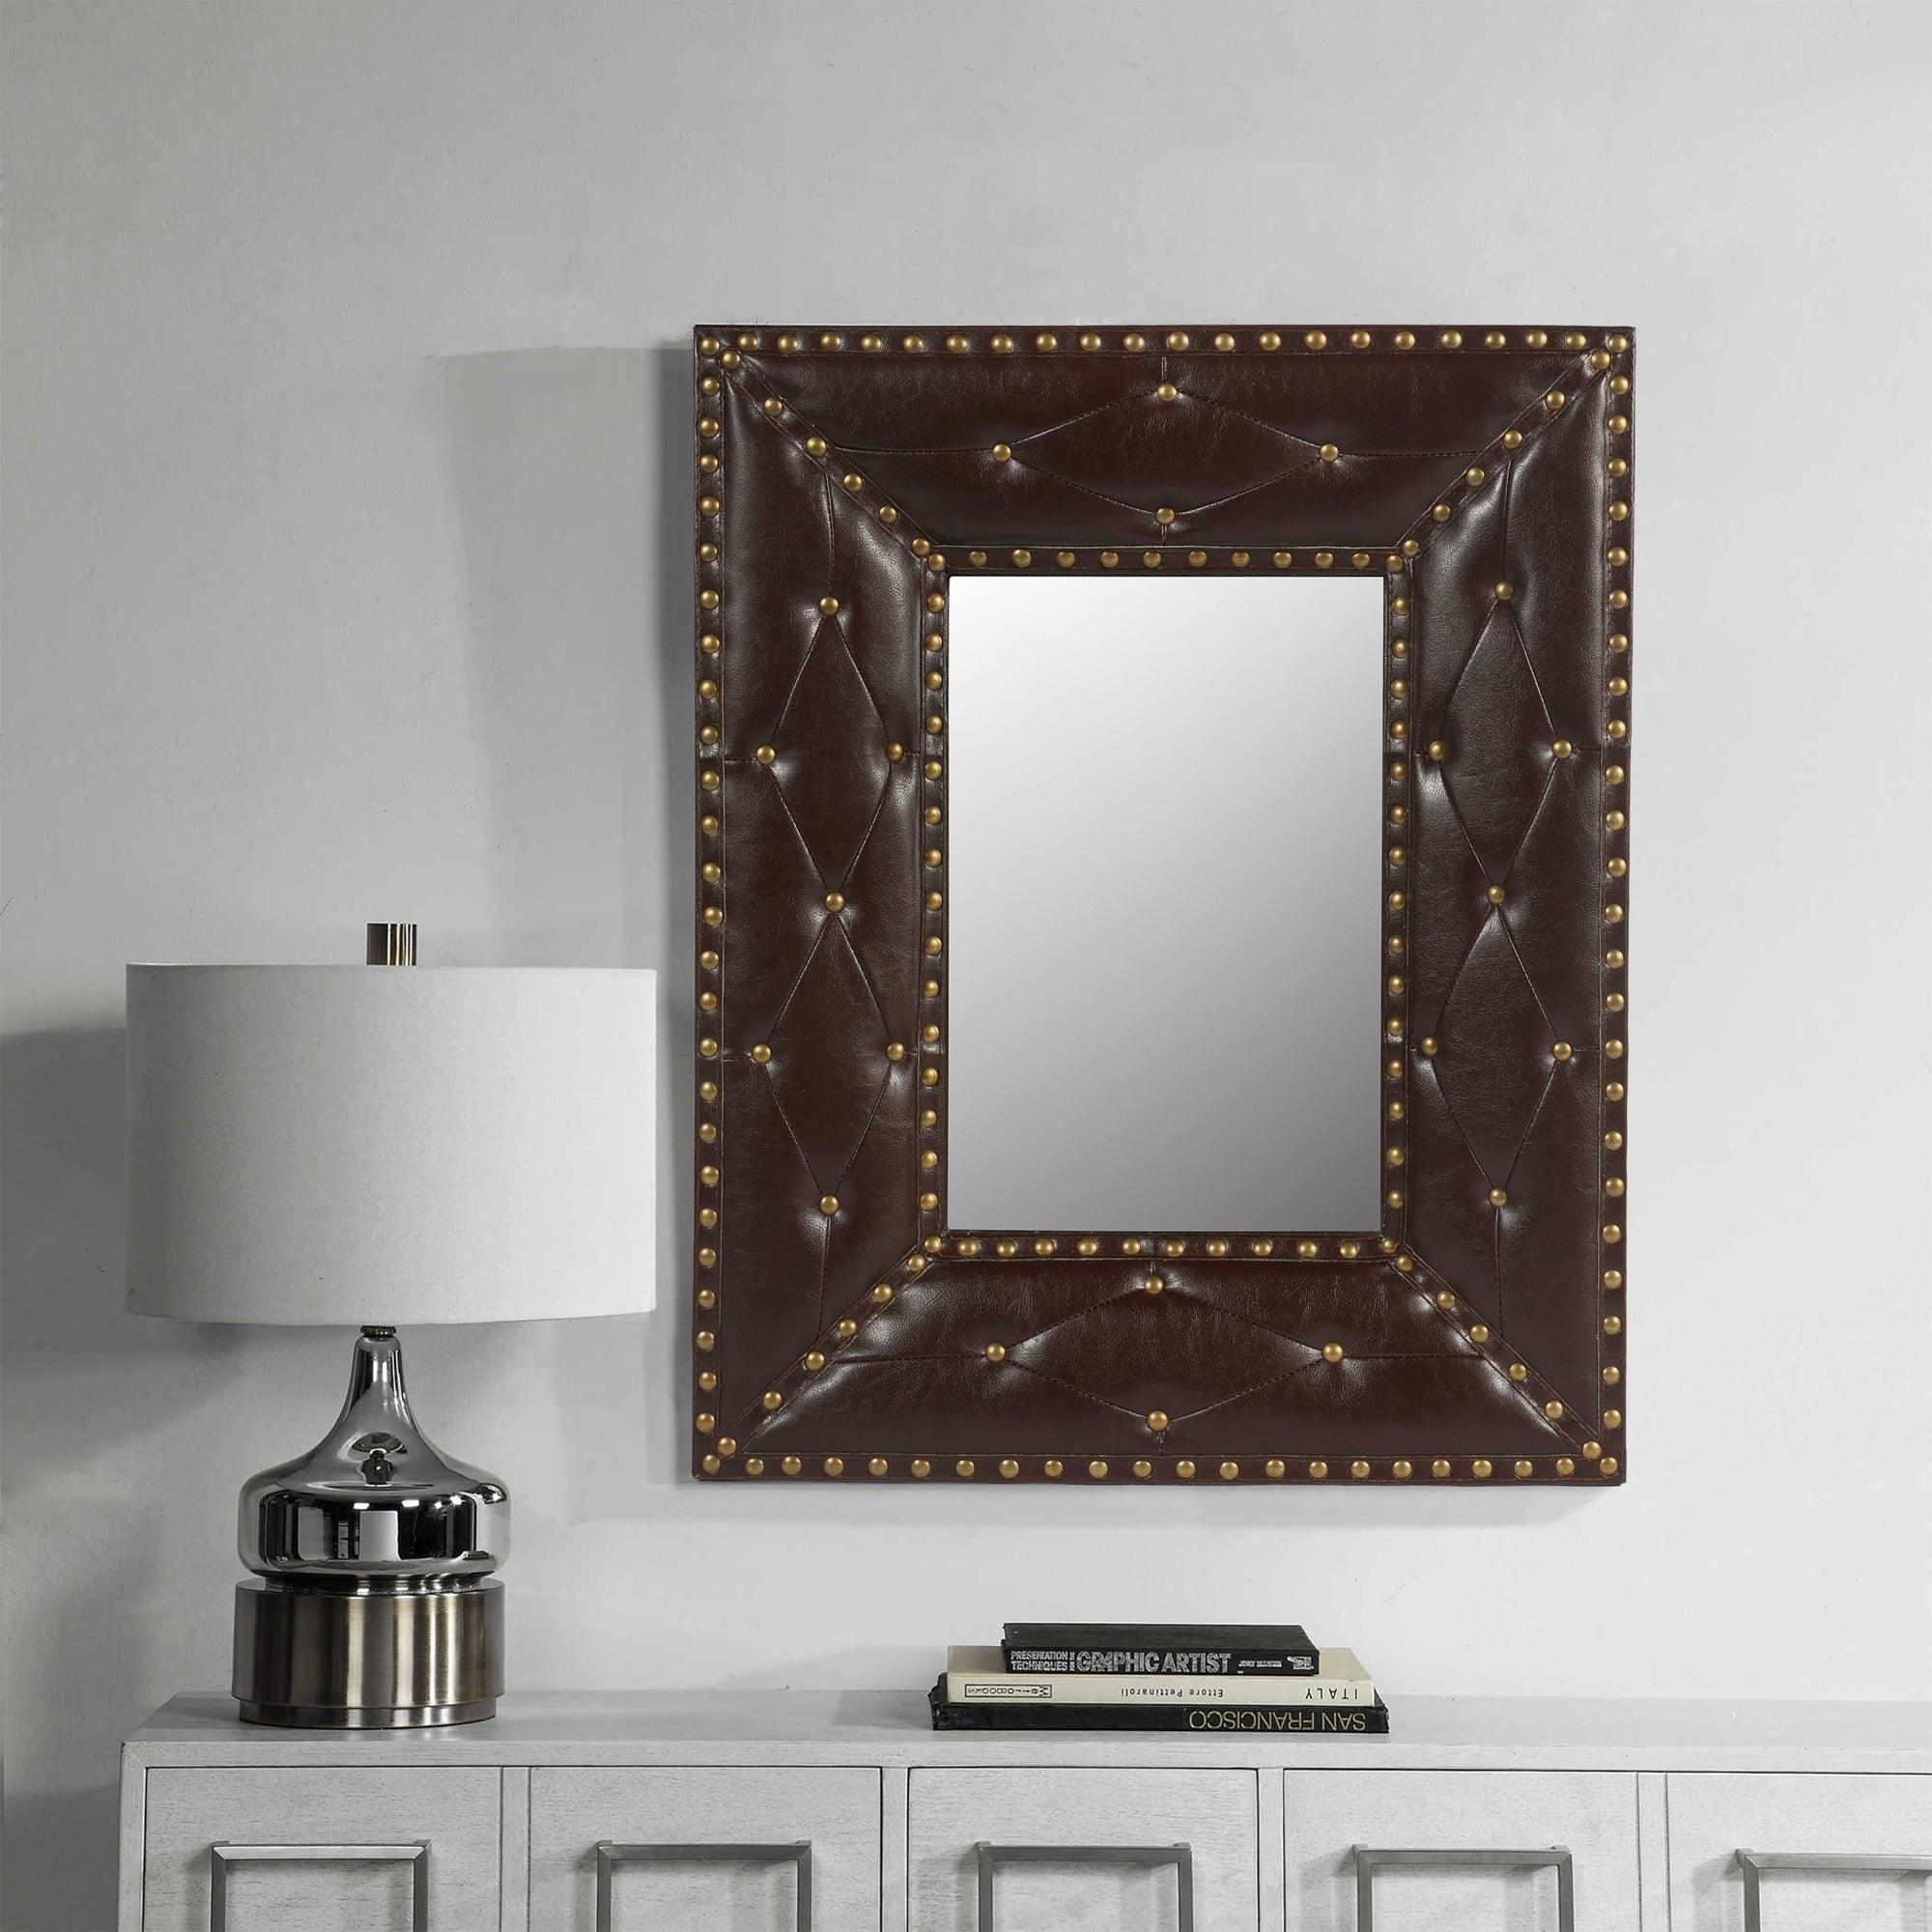 Brown Rectangle Decorative Wall Hanging Mirror, Rivet Decoration, PU Covered MDF Framed Mirror For Bedroom Living Room Vanity Entryway Wall Decor, 21X26Inch LamCham